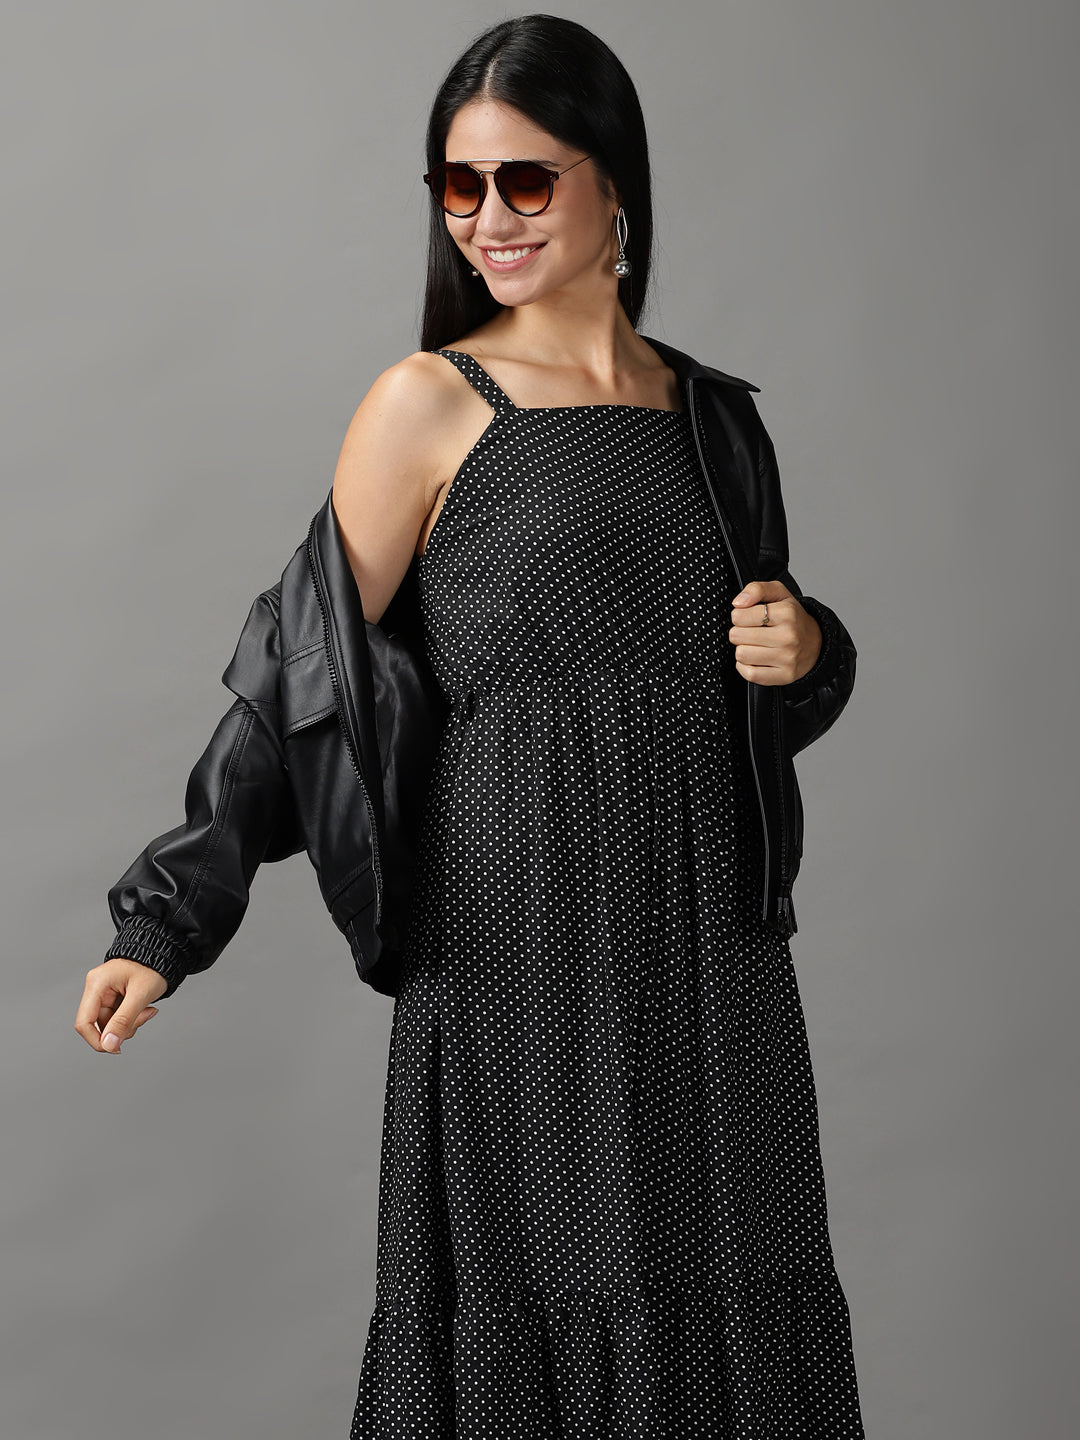 Women's Black Polka Dots Fit and Flare Dress